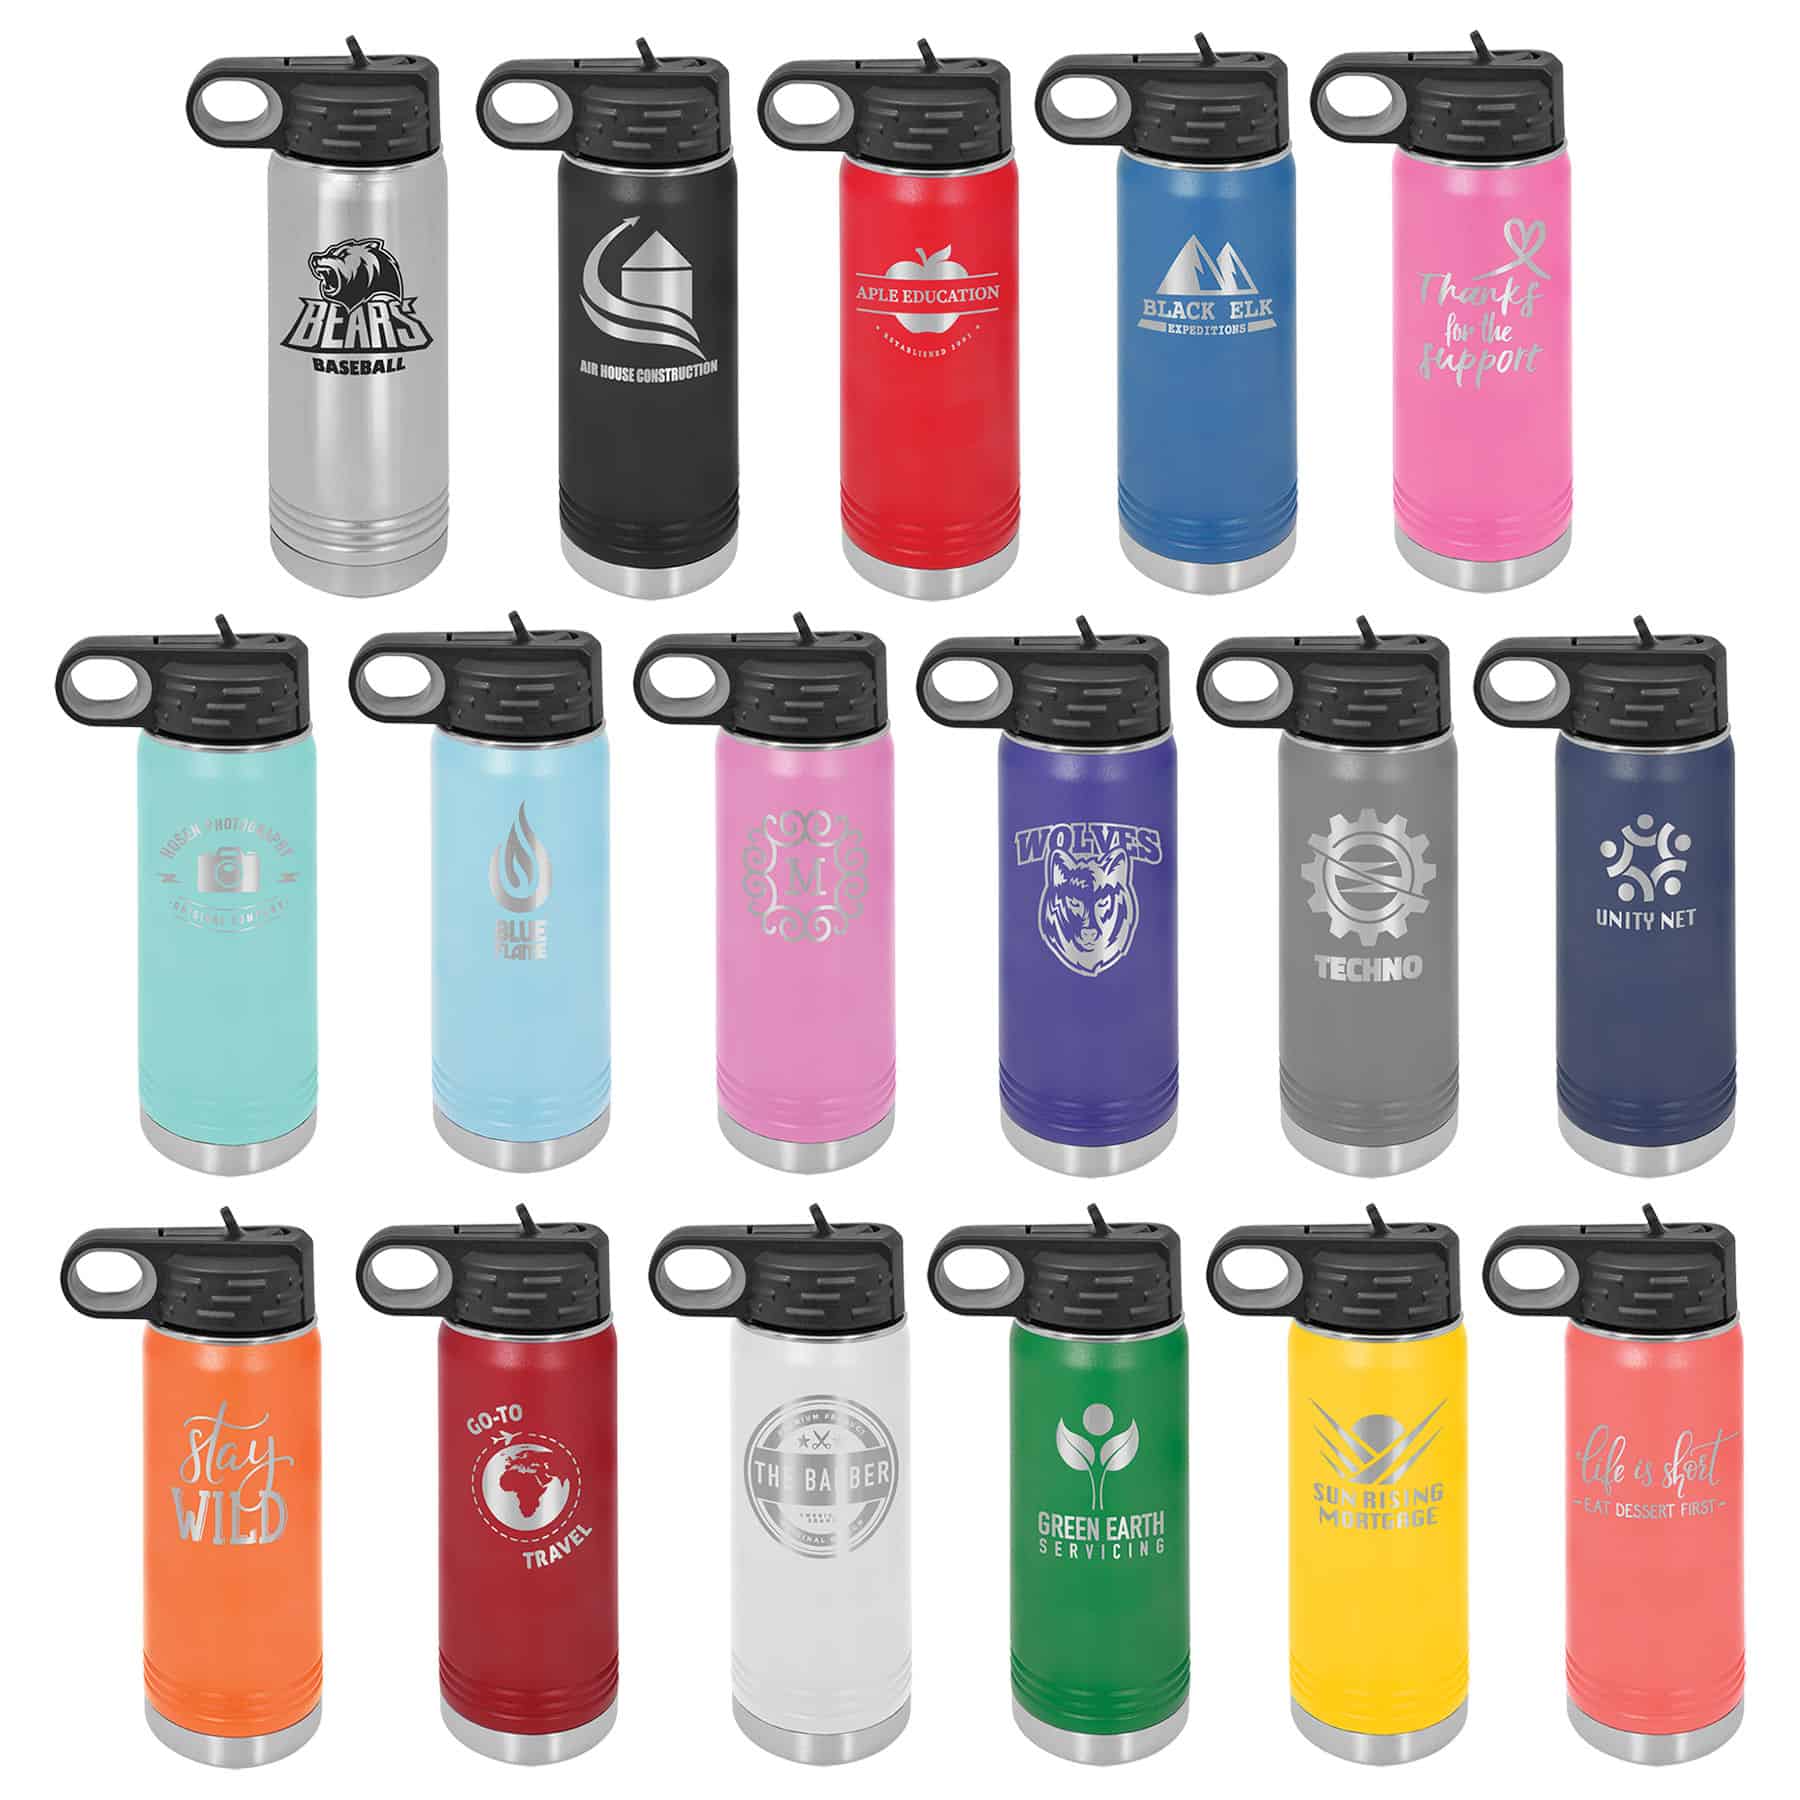 Stainless Steel Water Bottle 32 Oz With Option For Engraving 2